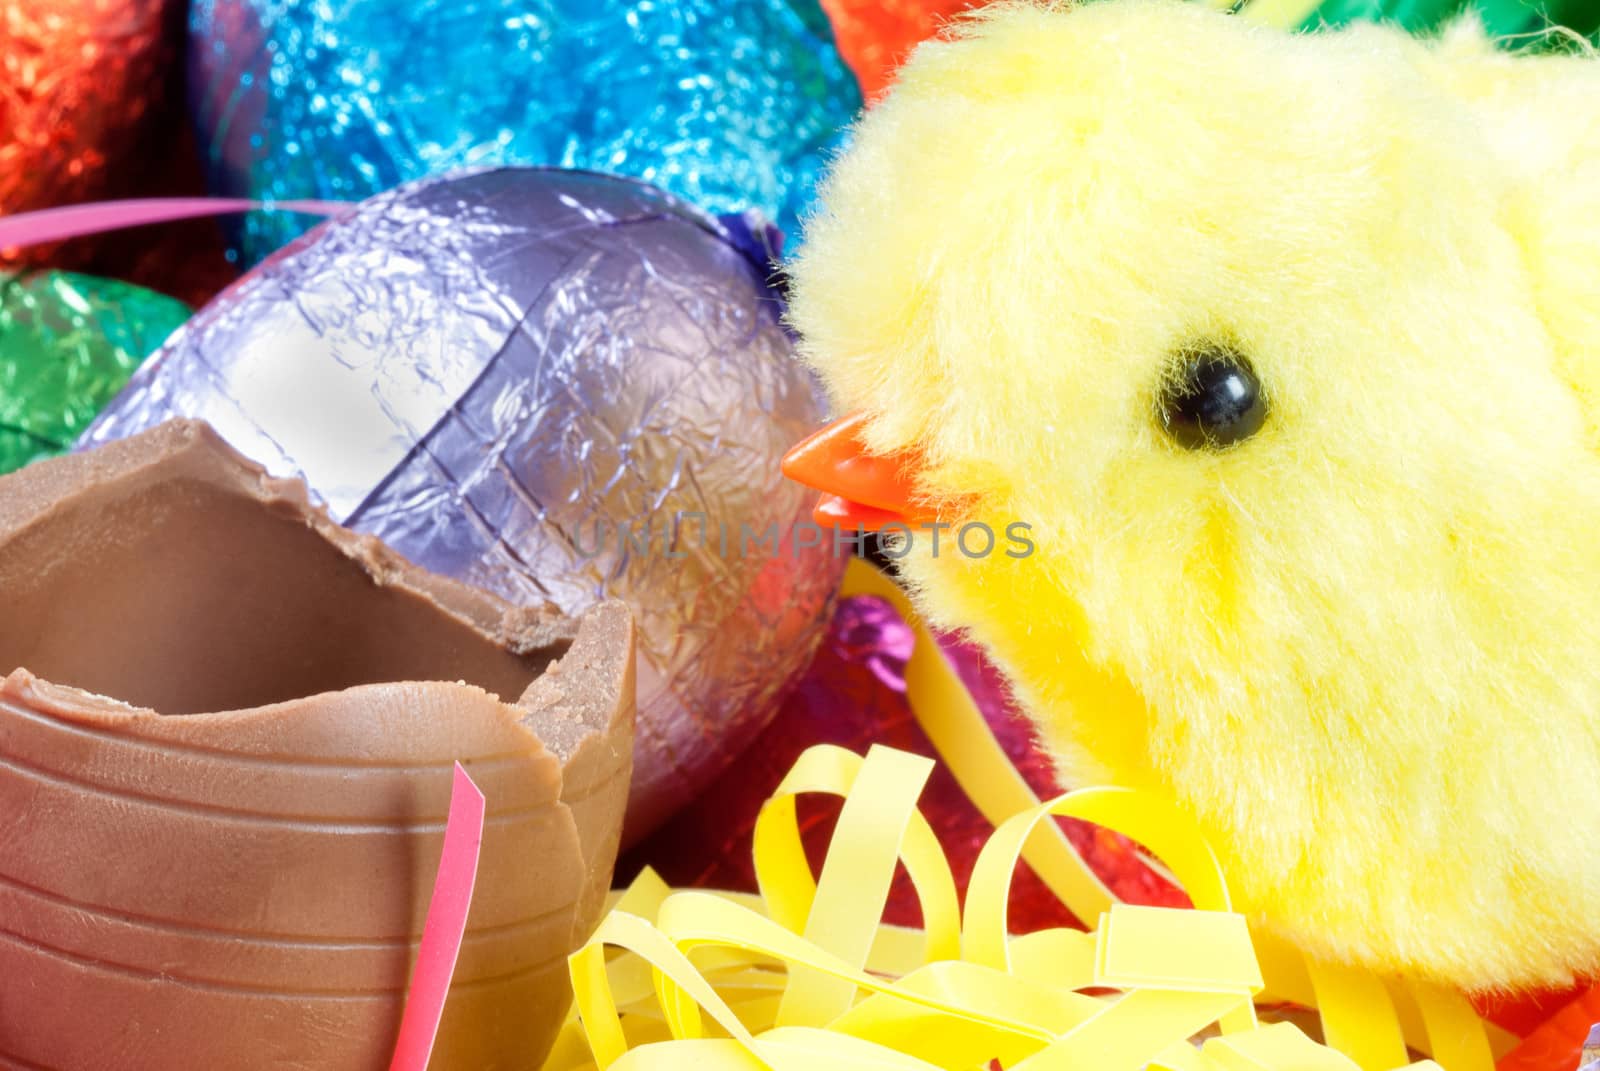 Close-up of a yellow fluffy chick toy beside a chocolate egg with a pile of colorful eggs and grasses in the background.